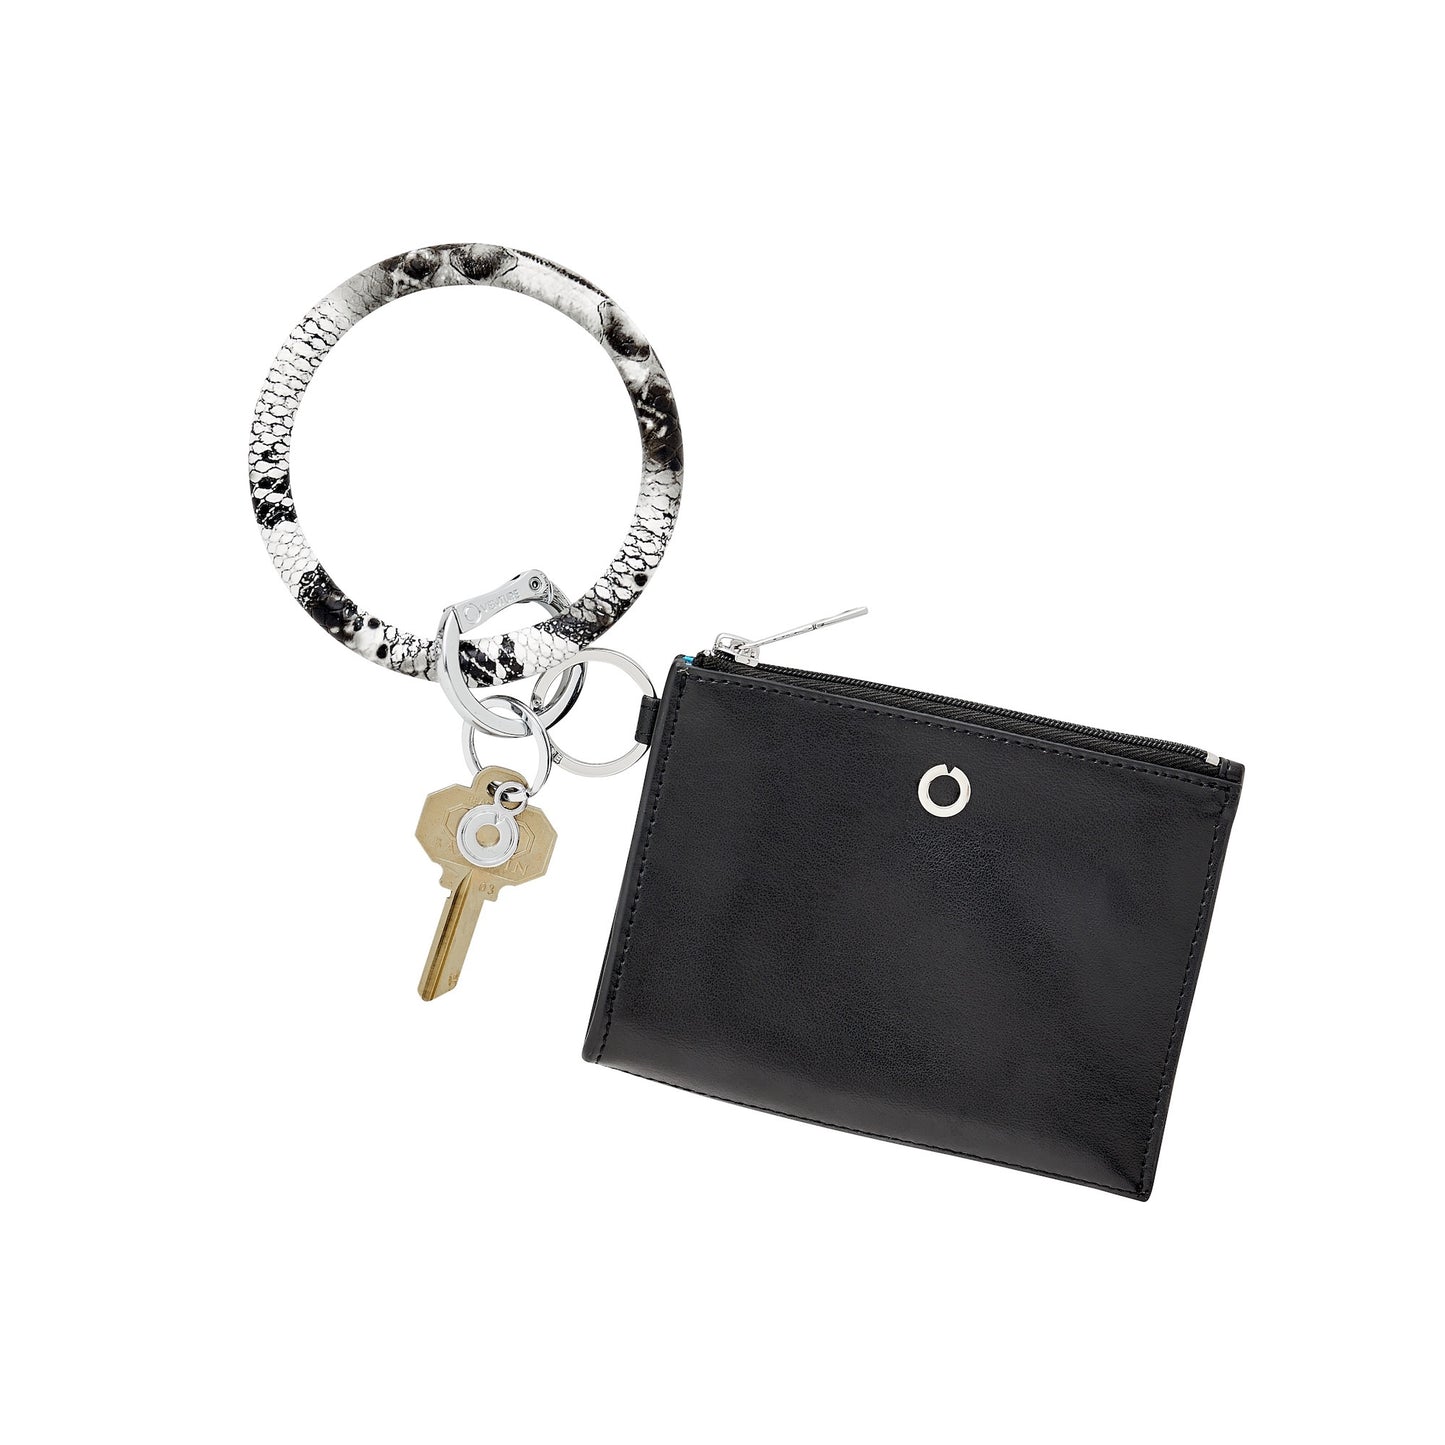 Black leather wallet wristlet for stylish organization on the go.  Attached to the key ring bracelet.